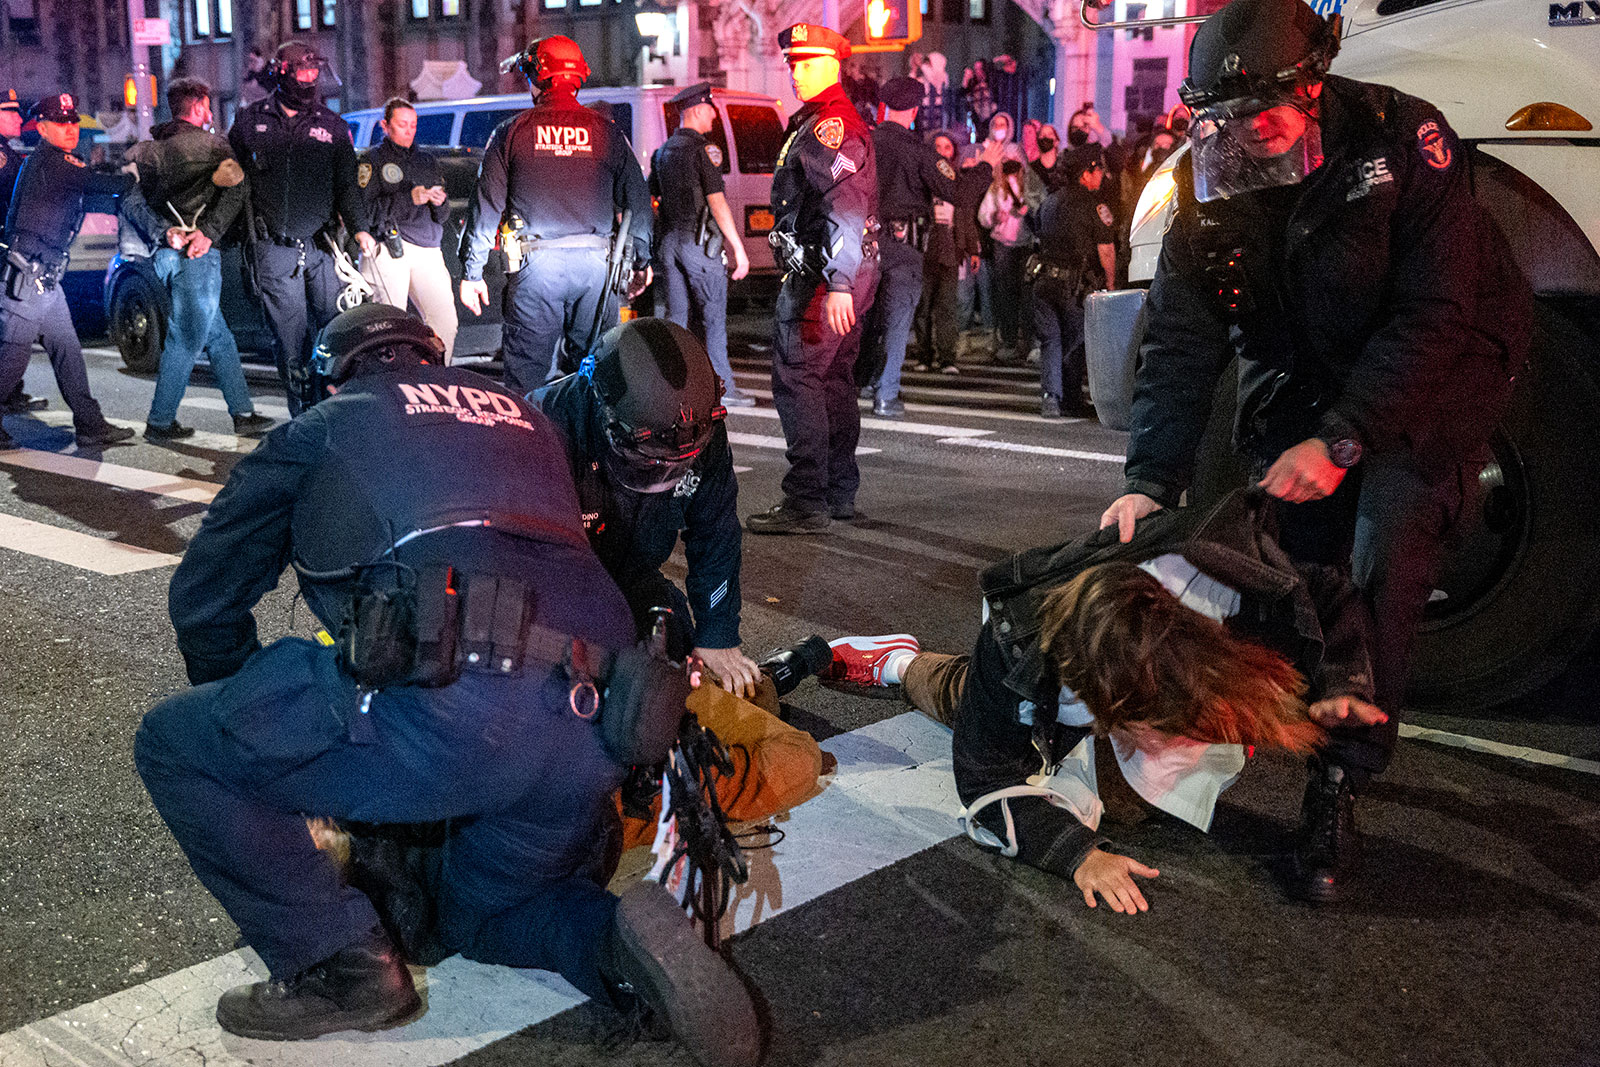 Police arrest protesters at The City College Of New York on April 30.